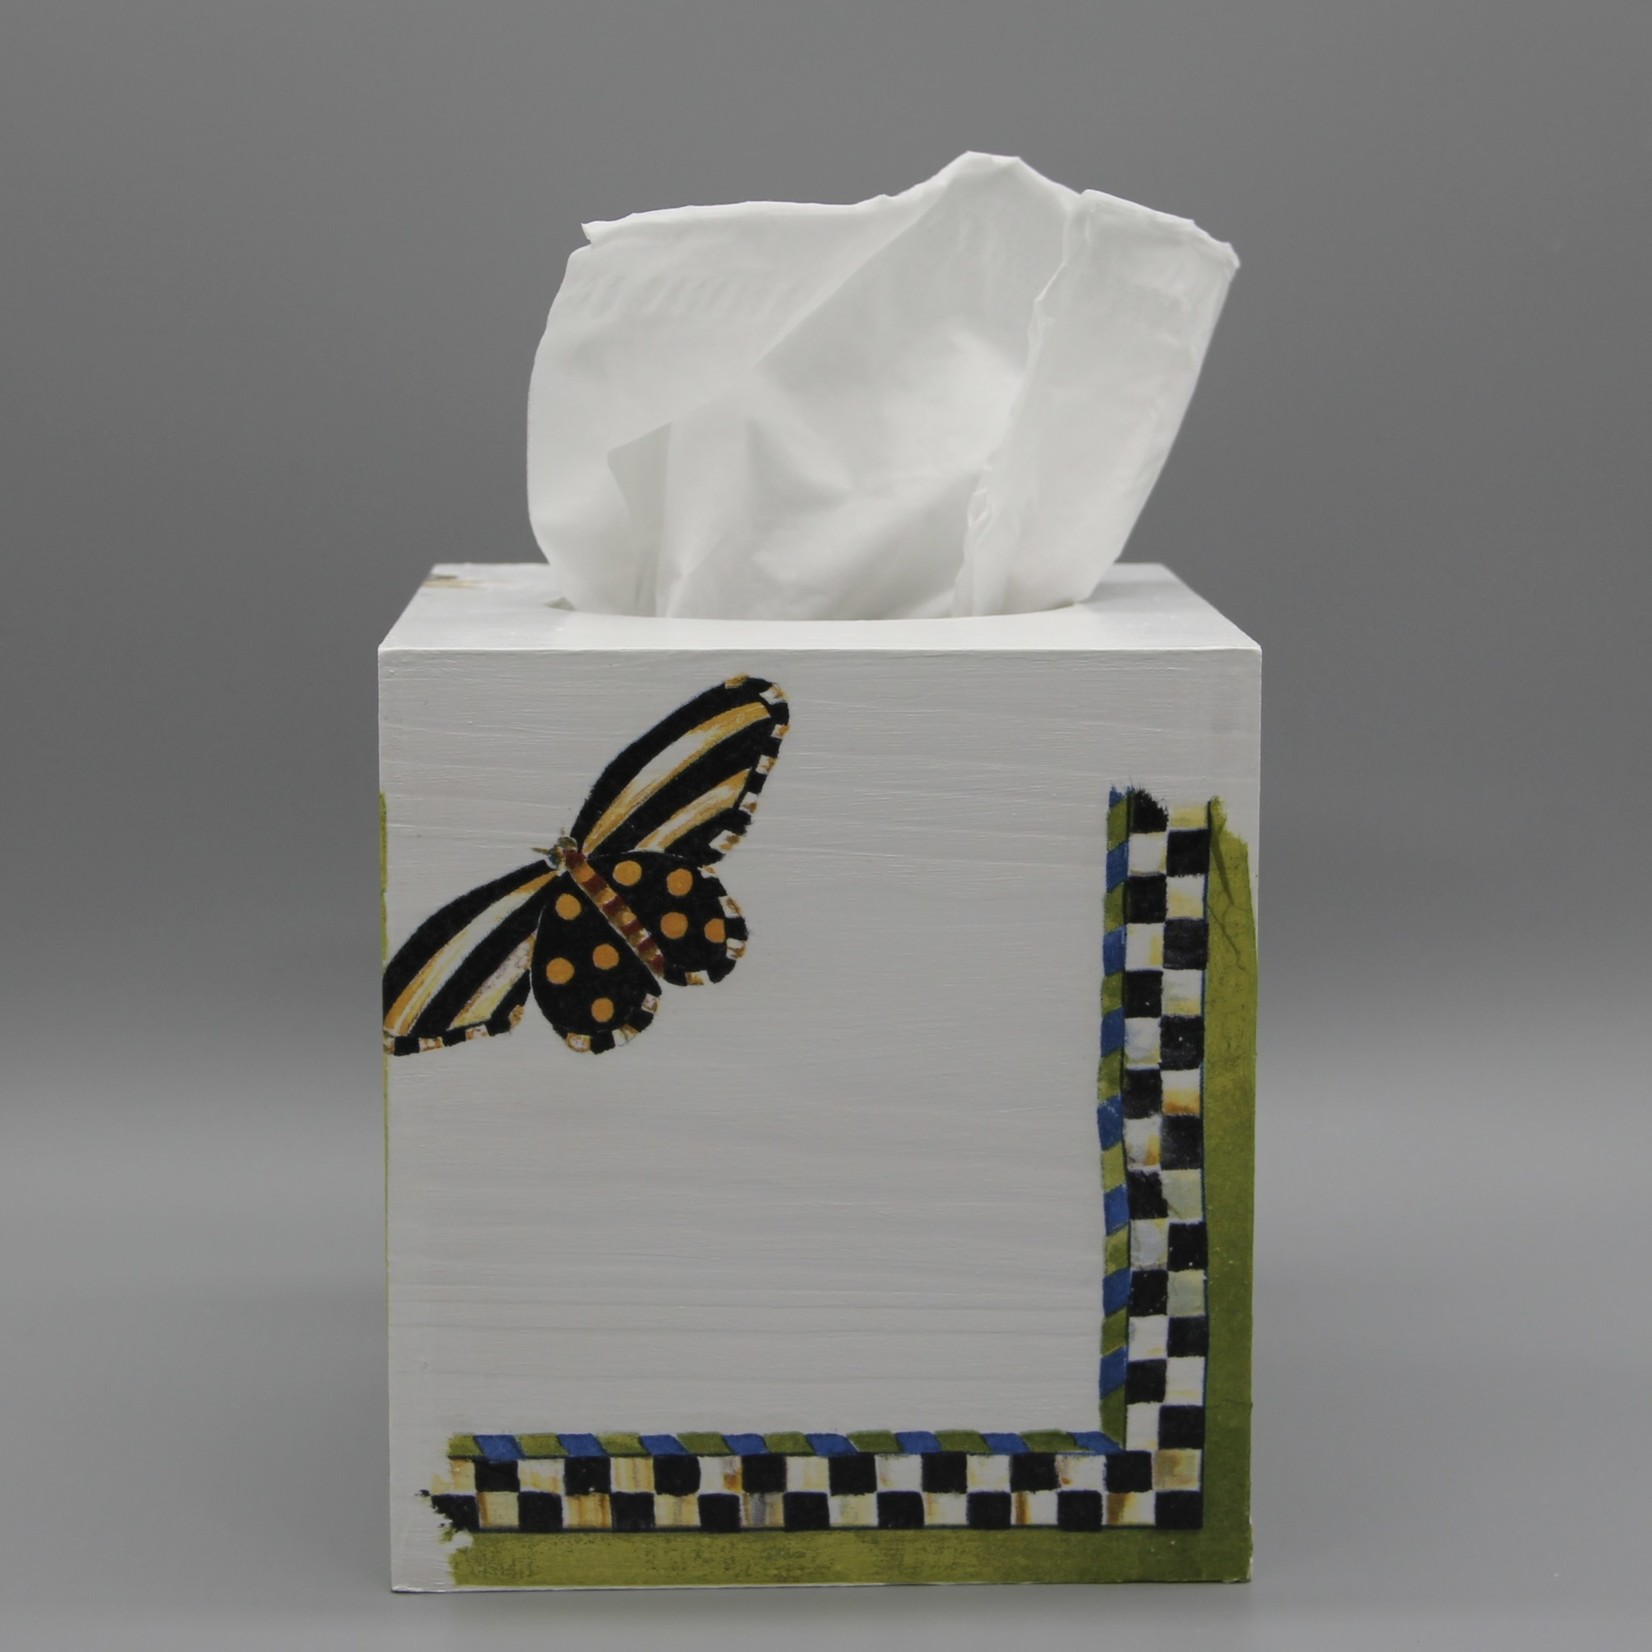 King Frog Tissue Box Cover